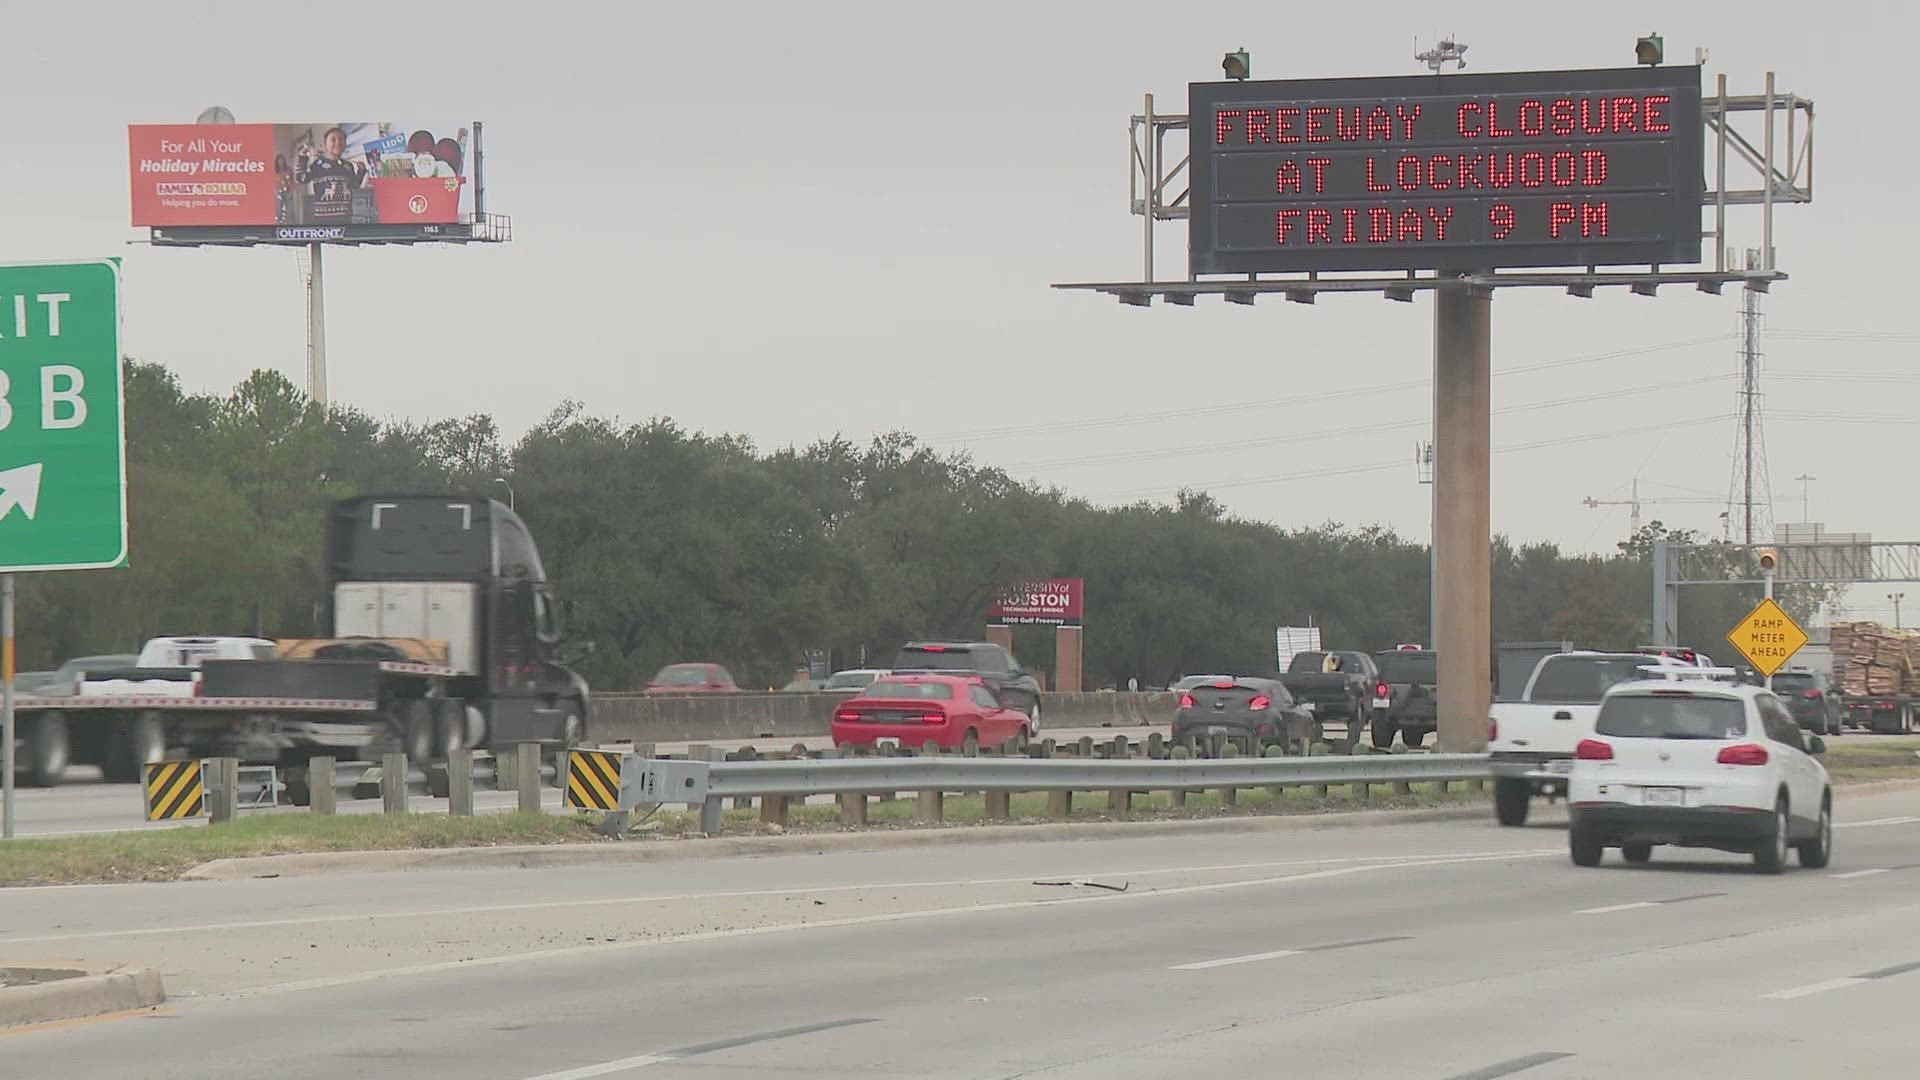 A major closure of the Gulf Freeway headed north will begin on Dec. 2 at 9 p.m. and last until early Monday, Dec. 5.